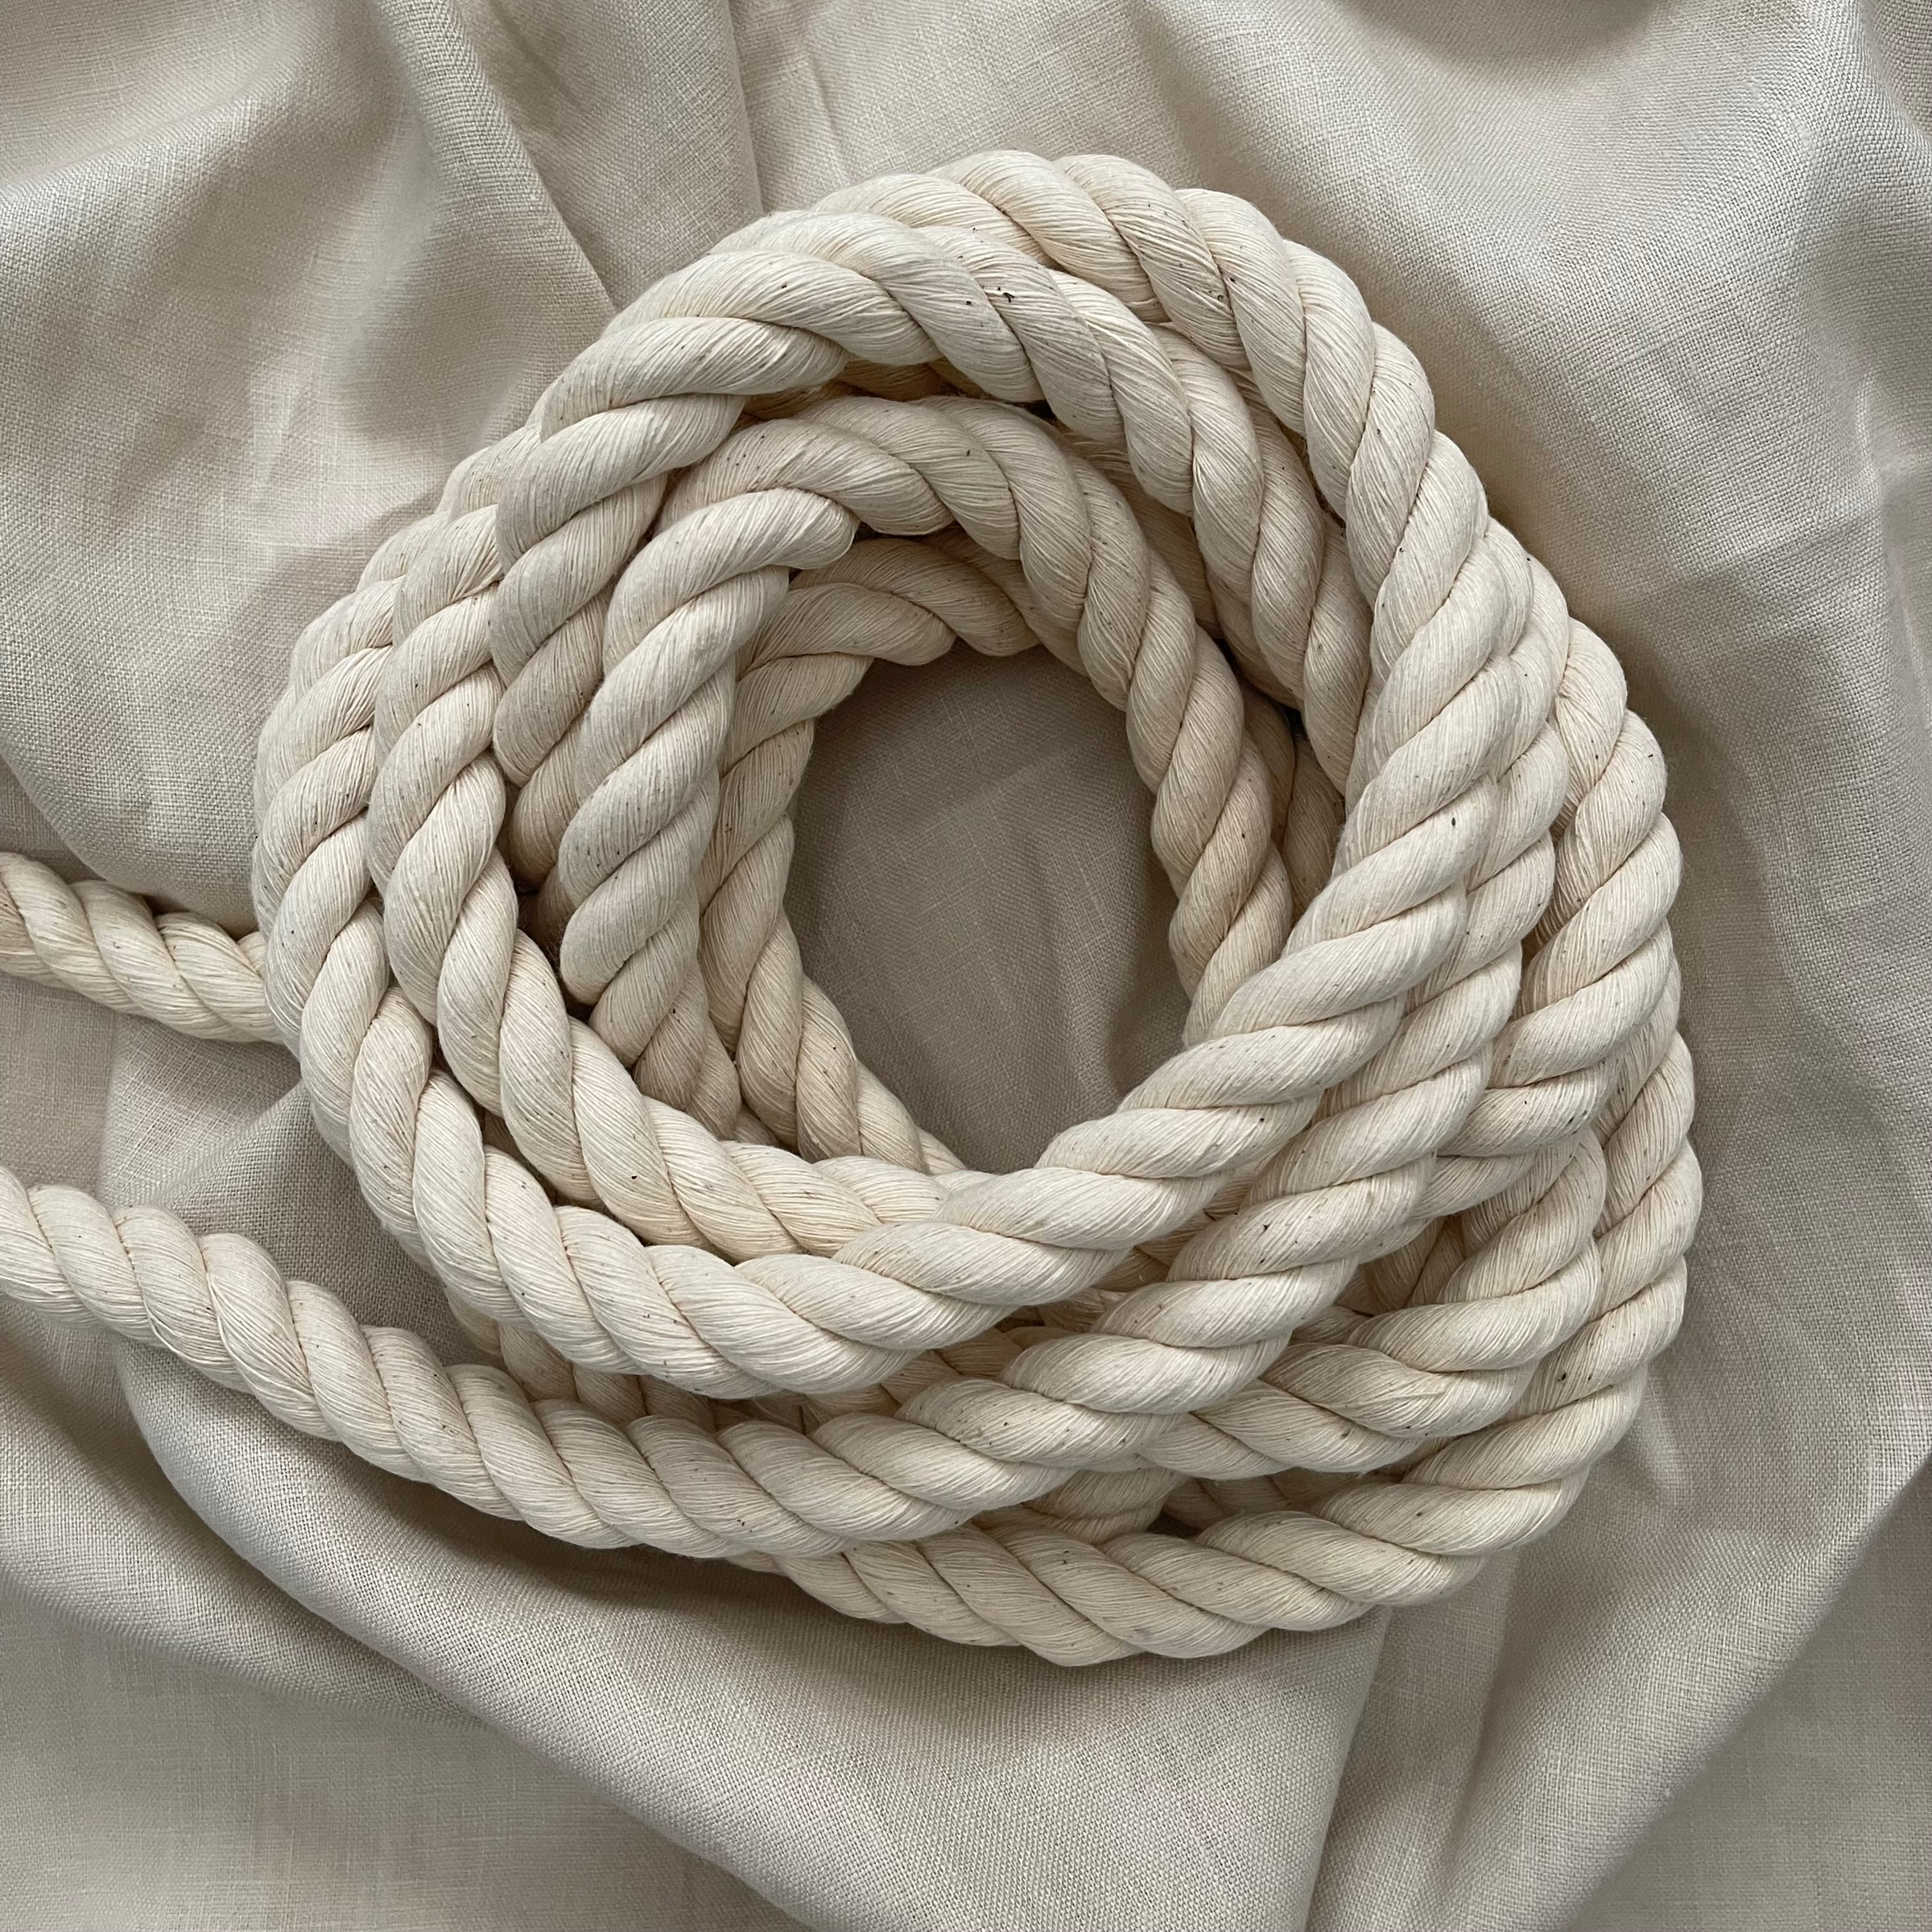 Macrame 3ply Cotton Rope in Natural 16mm is an ever popular and essential item for every fibre lovers tool kit!  Use them for fibre rainbows or separate to use individually for your creations.  